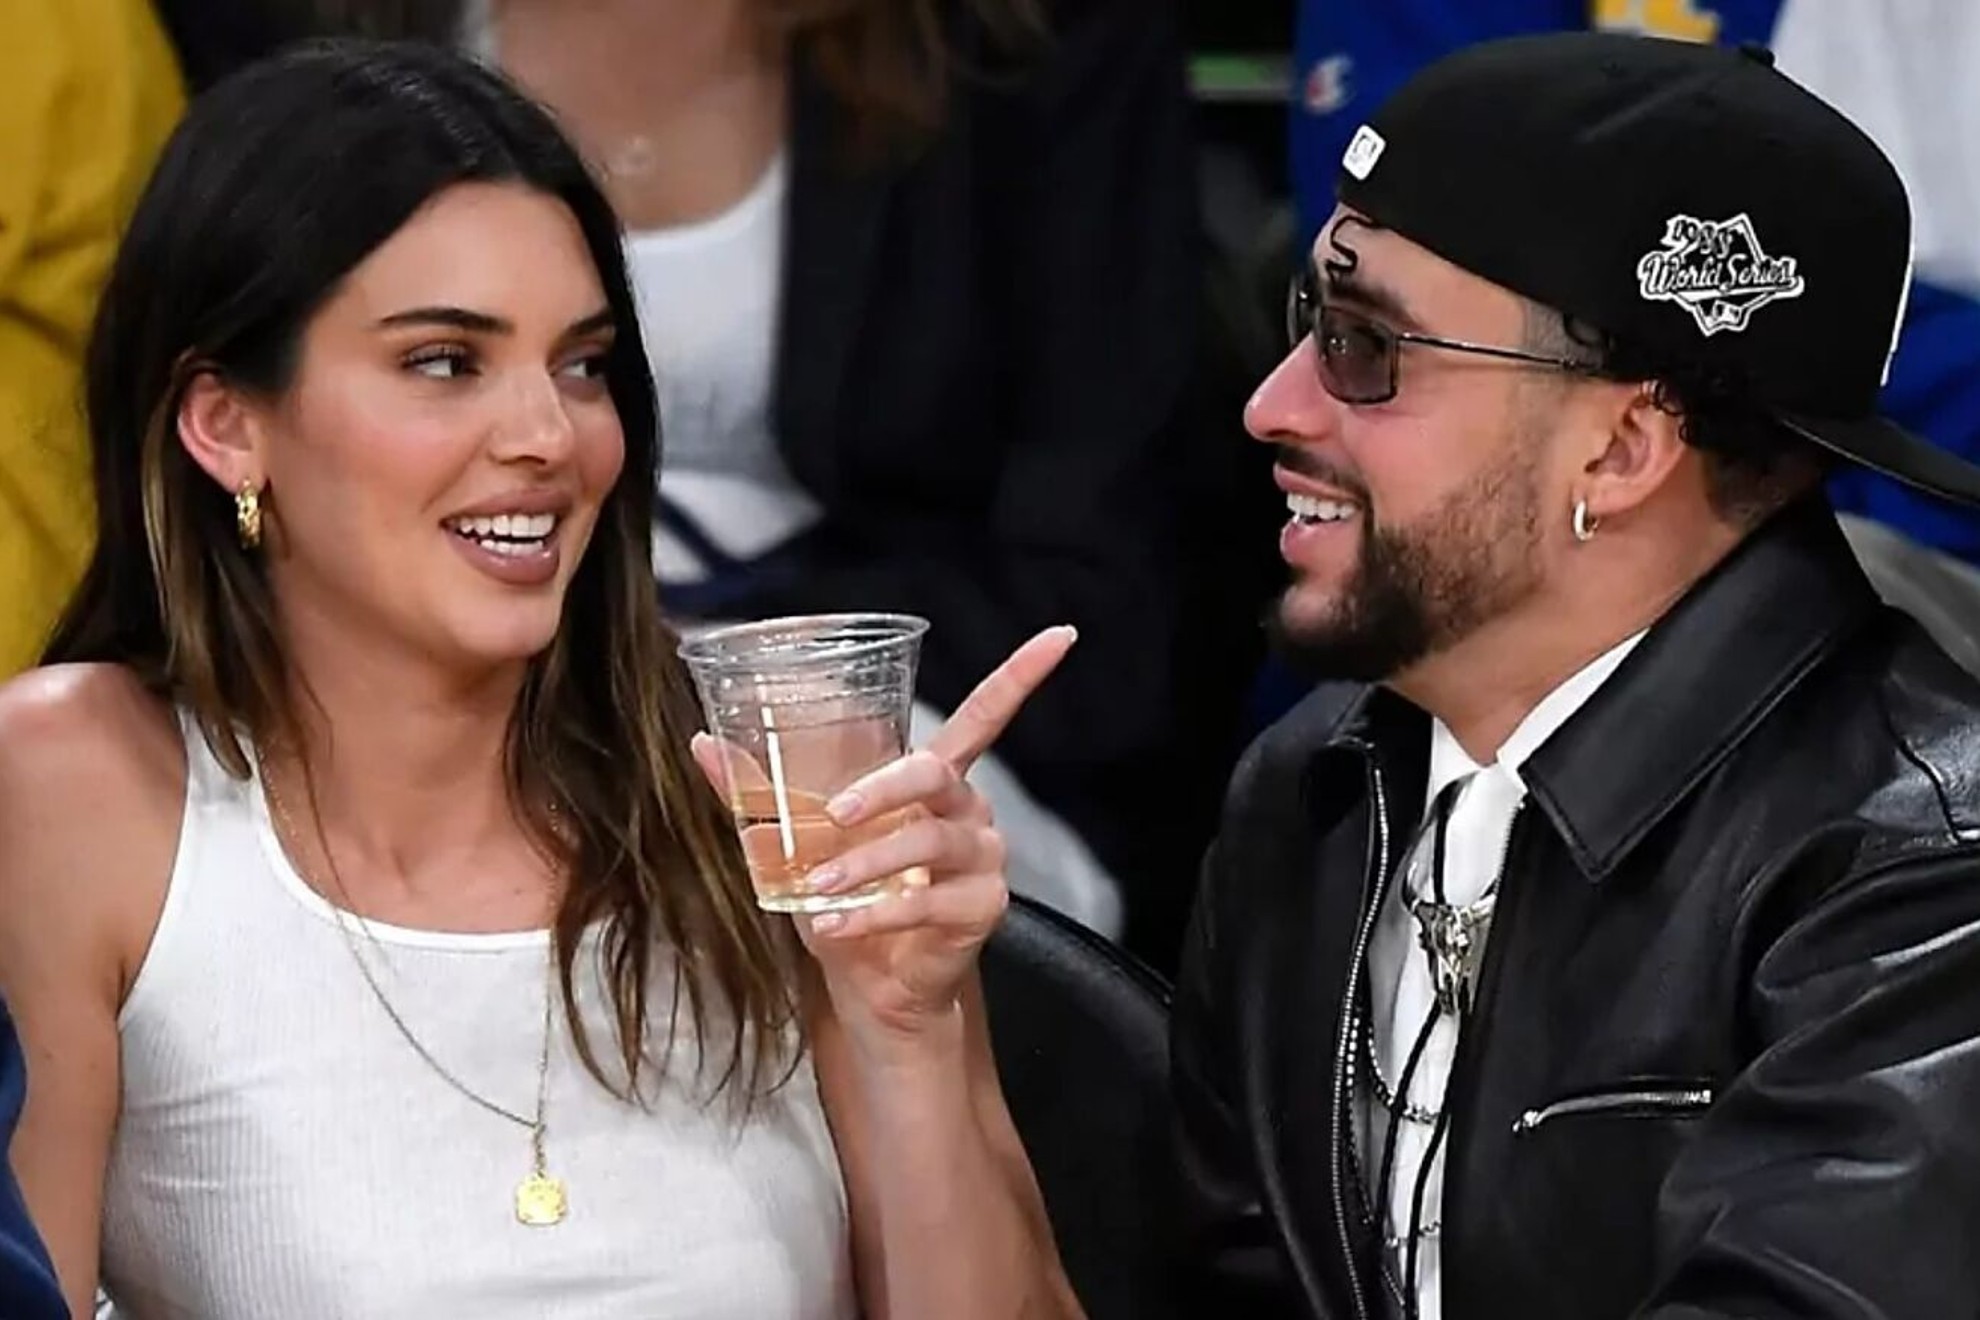 Kendall Jenner and Bad Bunny: Love or arrangement? All the past relationships of the couple